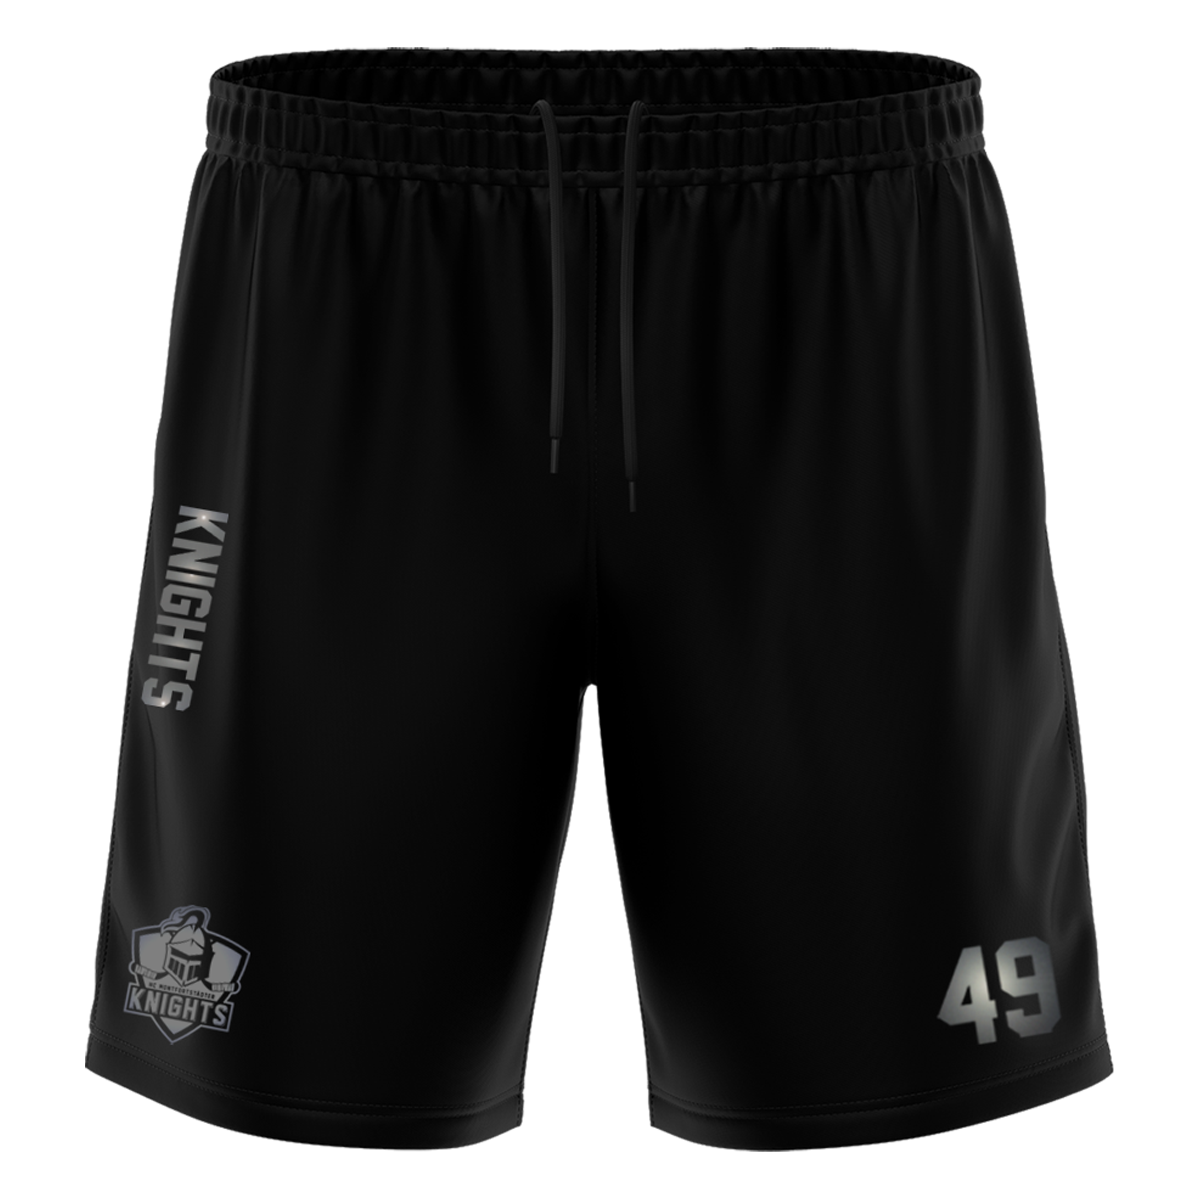 HCK "Blackline" Training Short with Playernumber or Initials